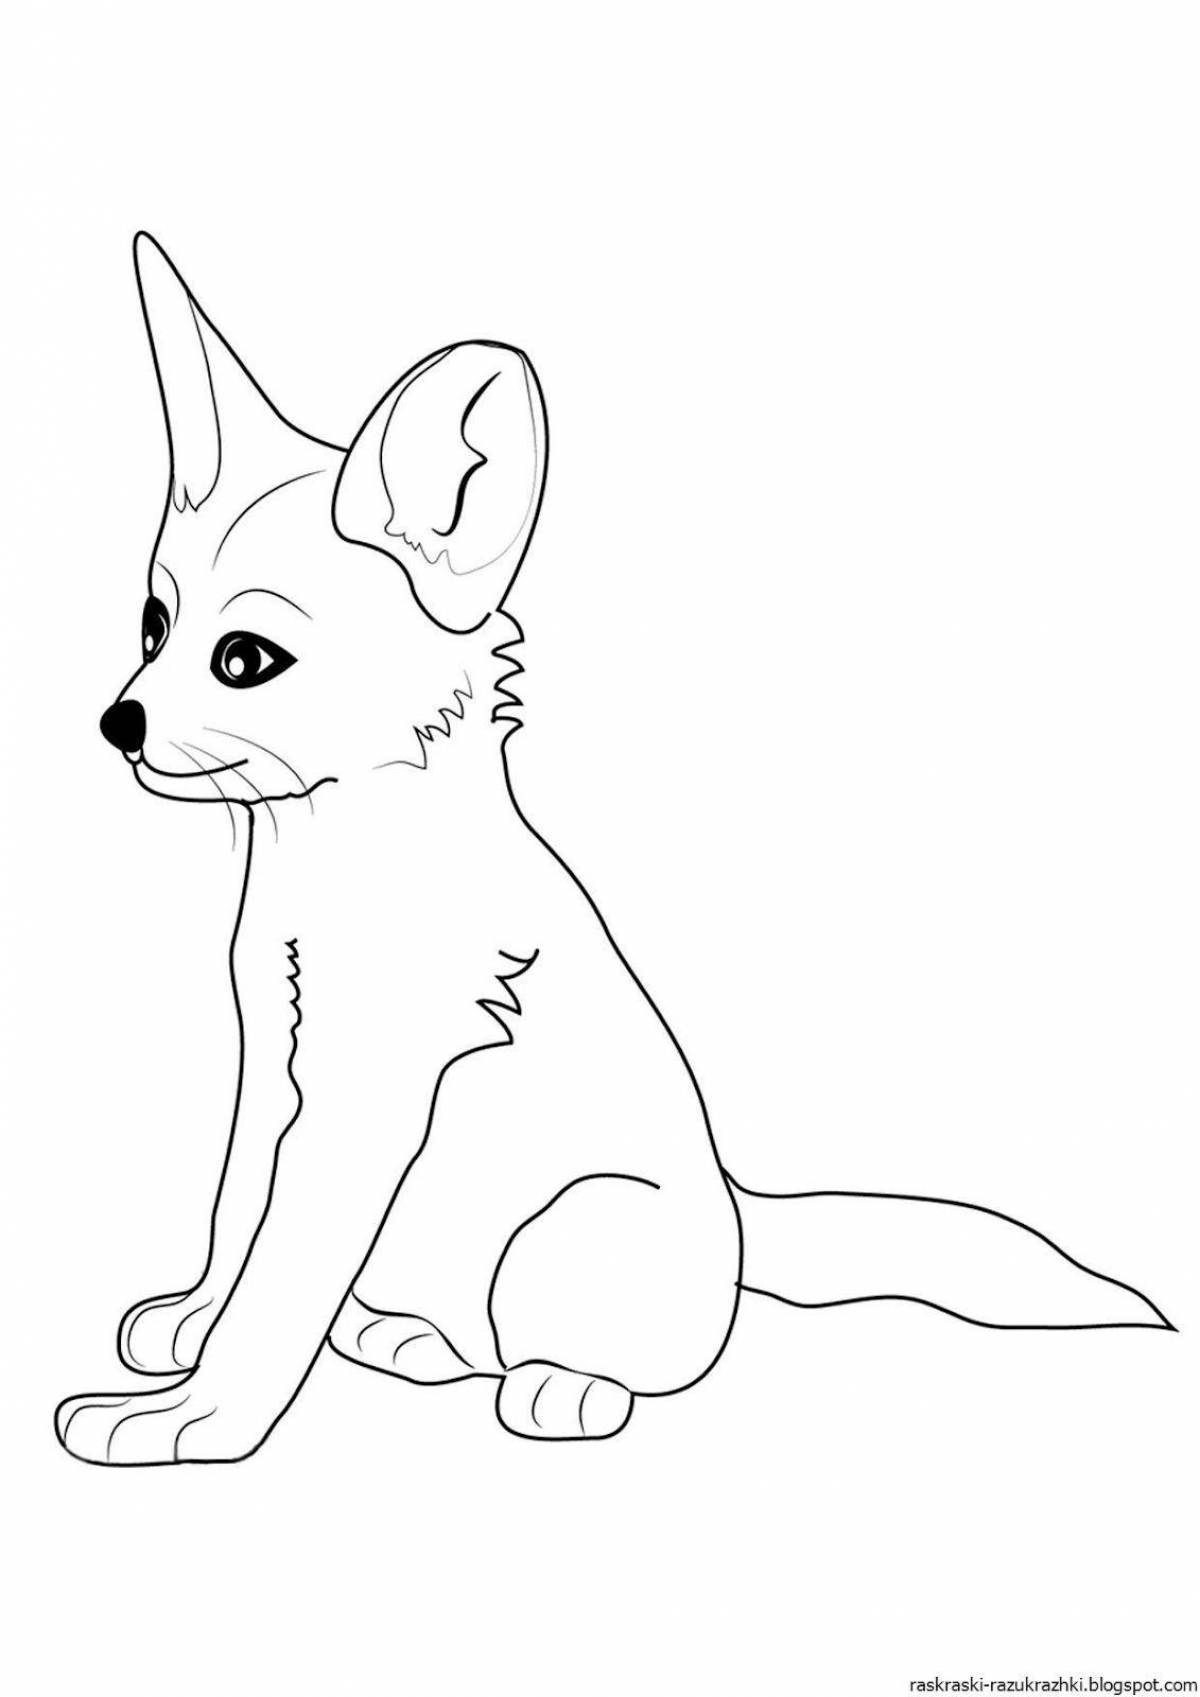 Cute fox drawing for kids